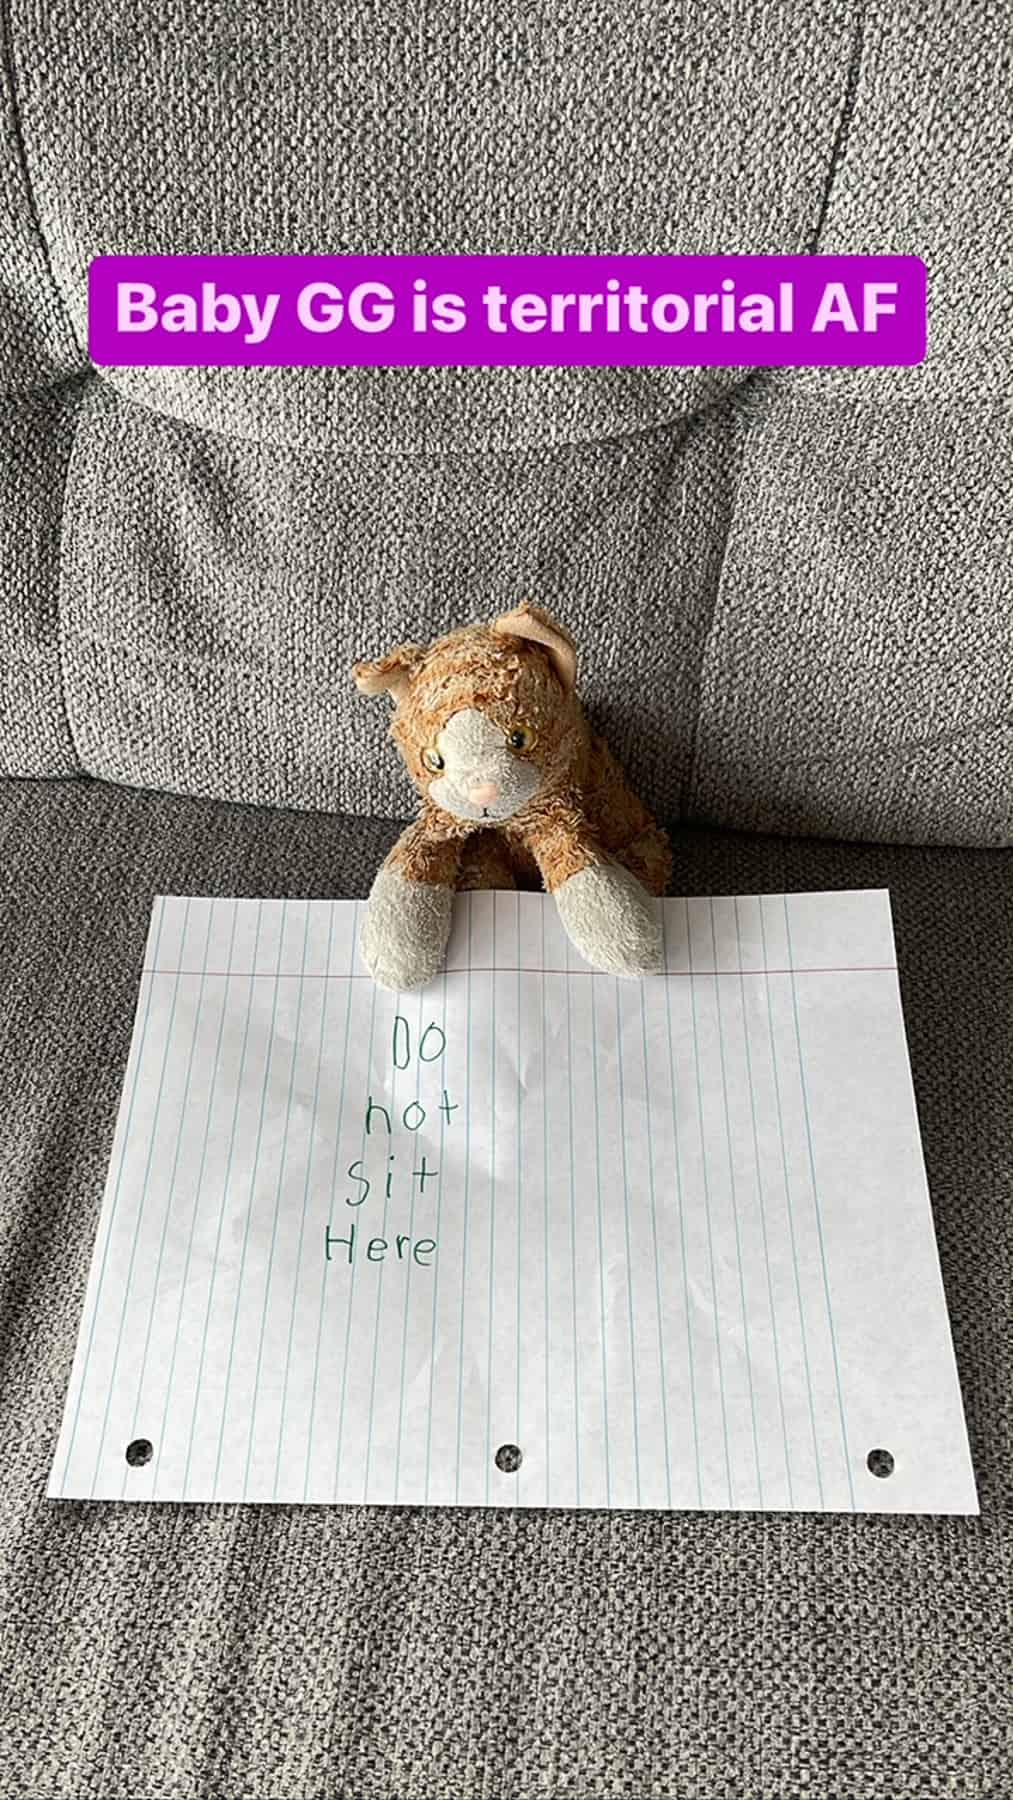 a stuffed cat with a sign on the couch.